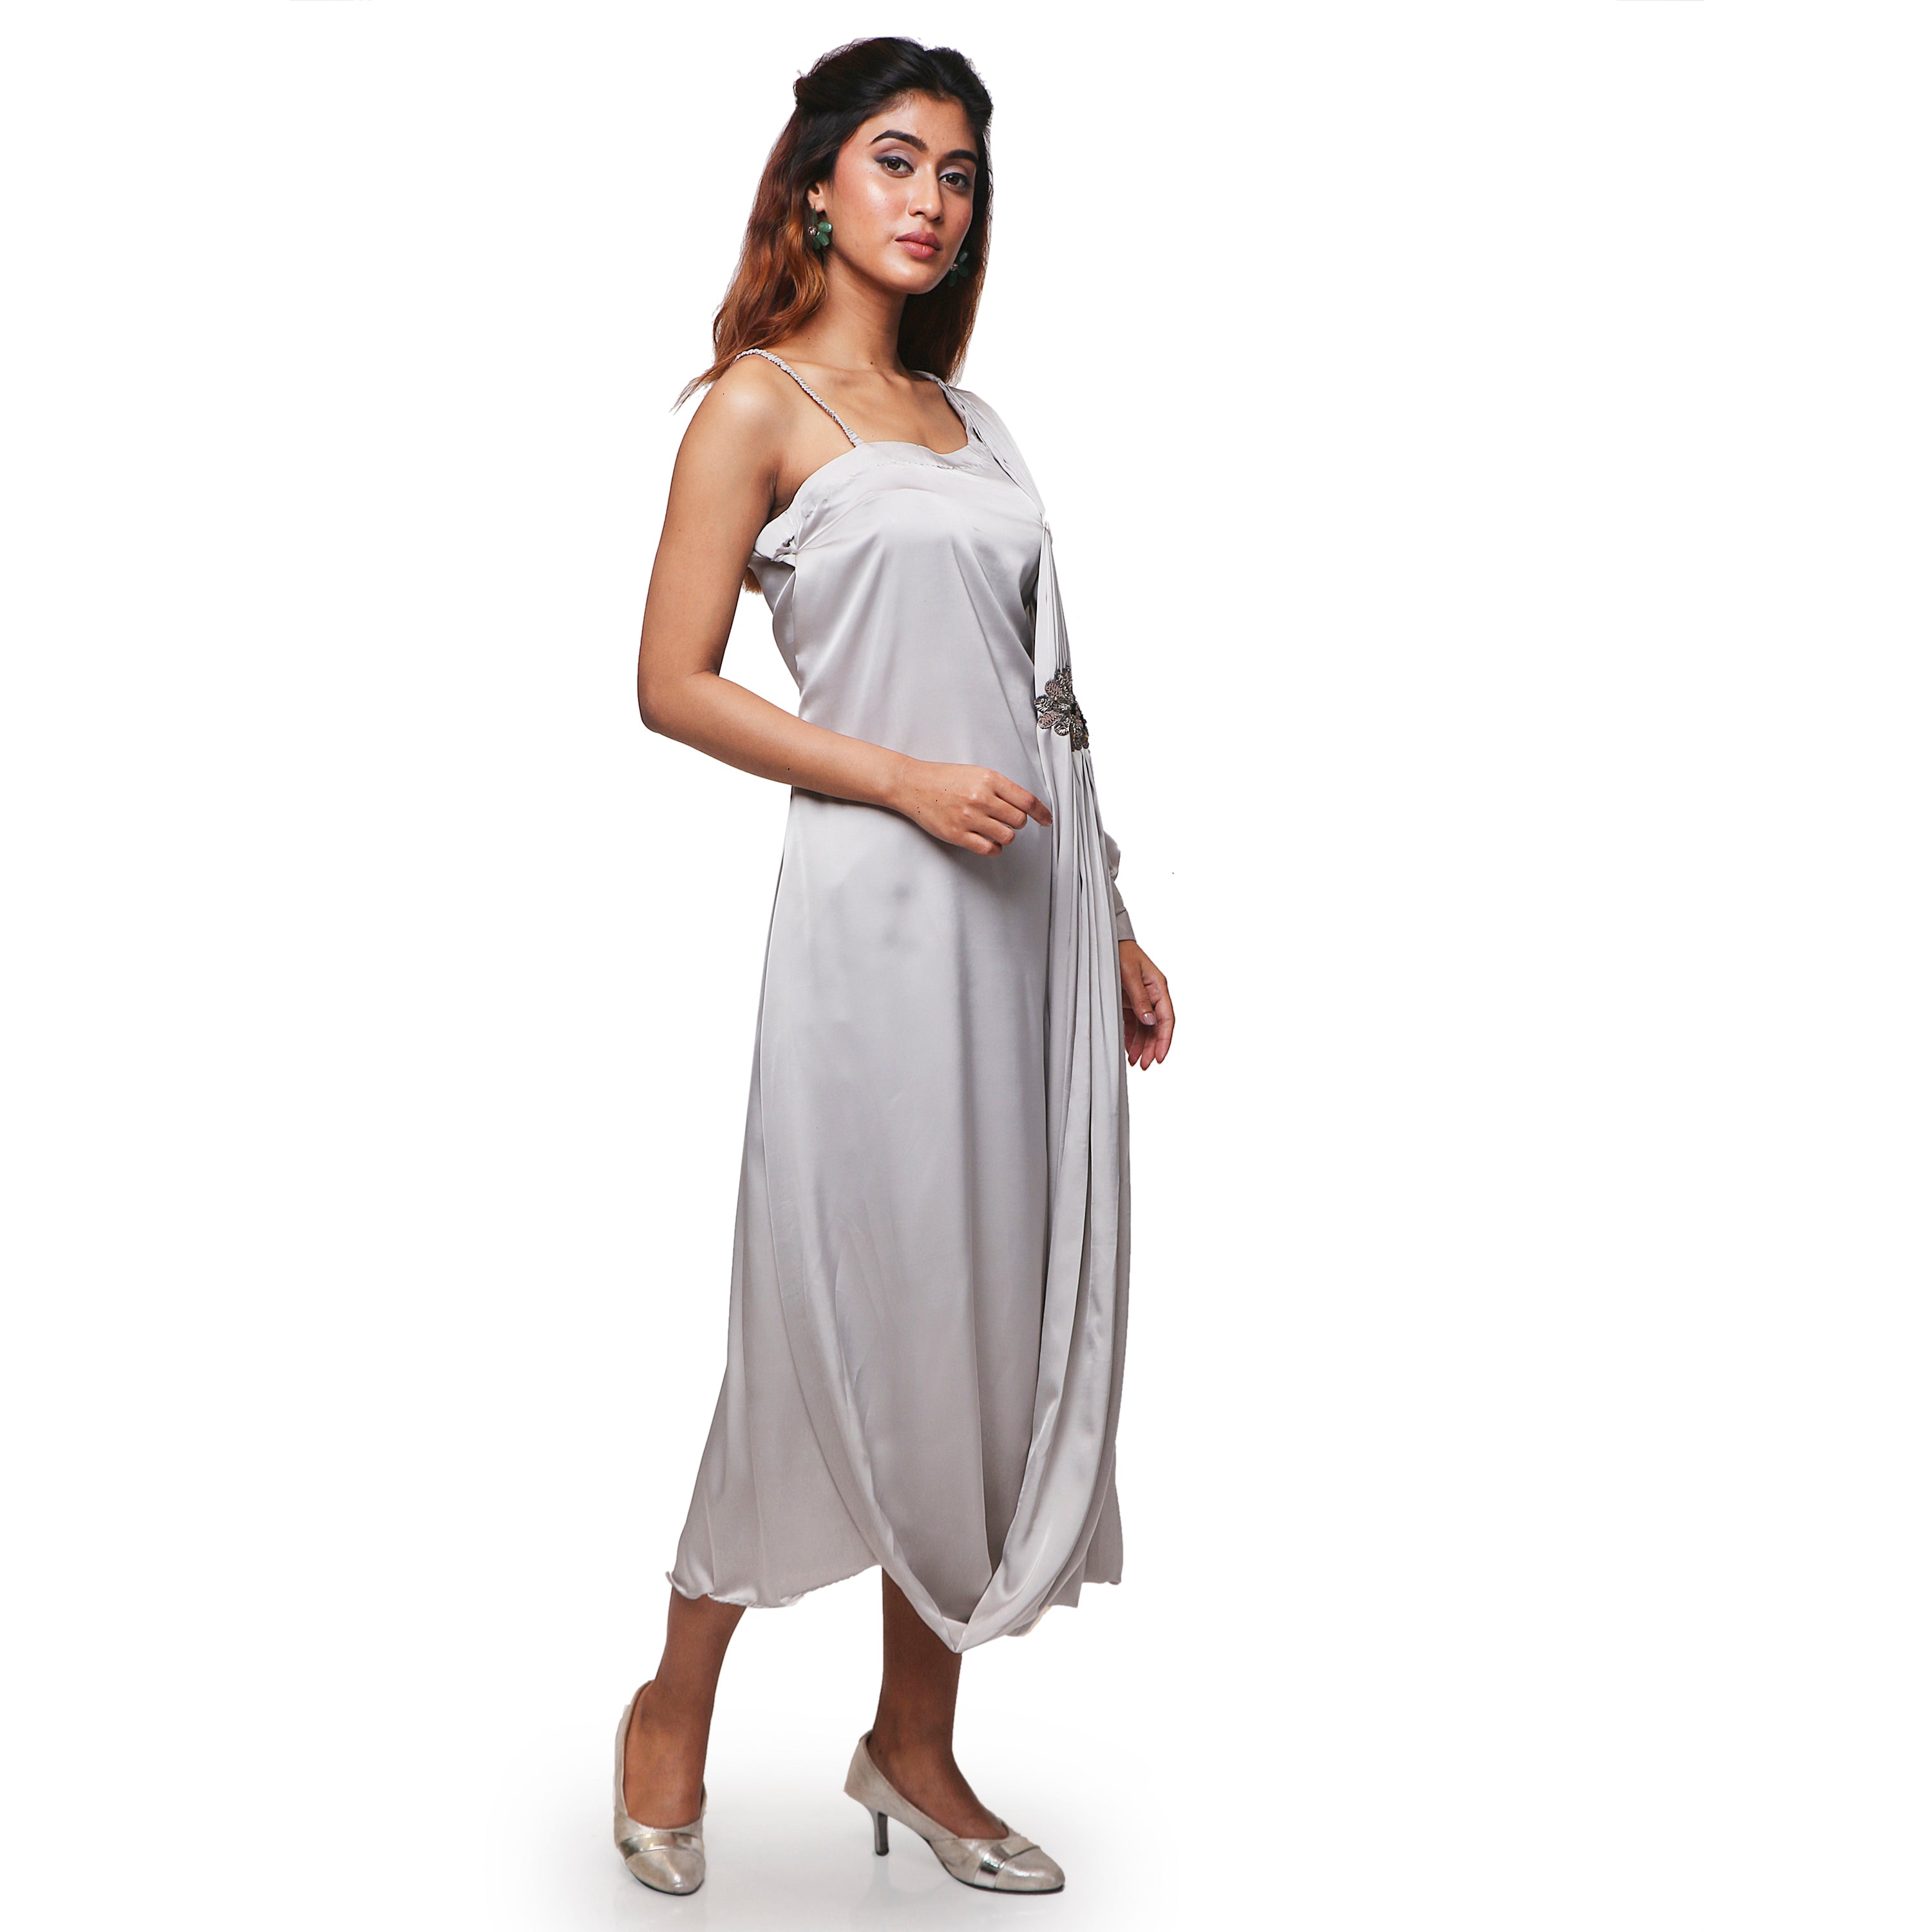 One Piece Gown in Satin Crepe